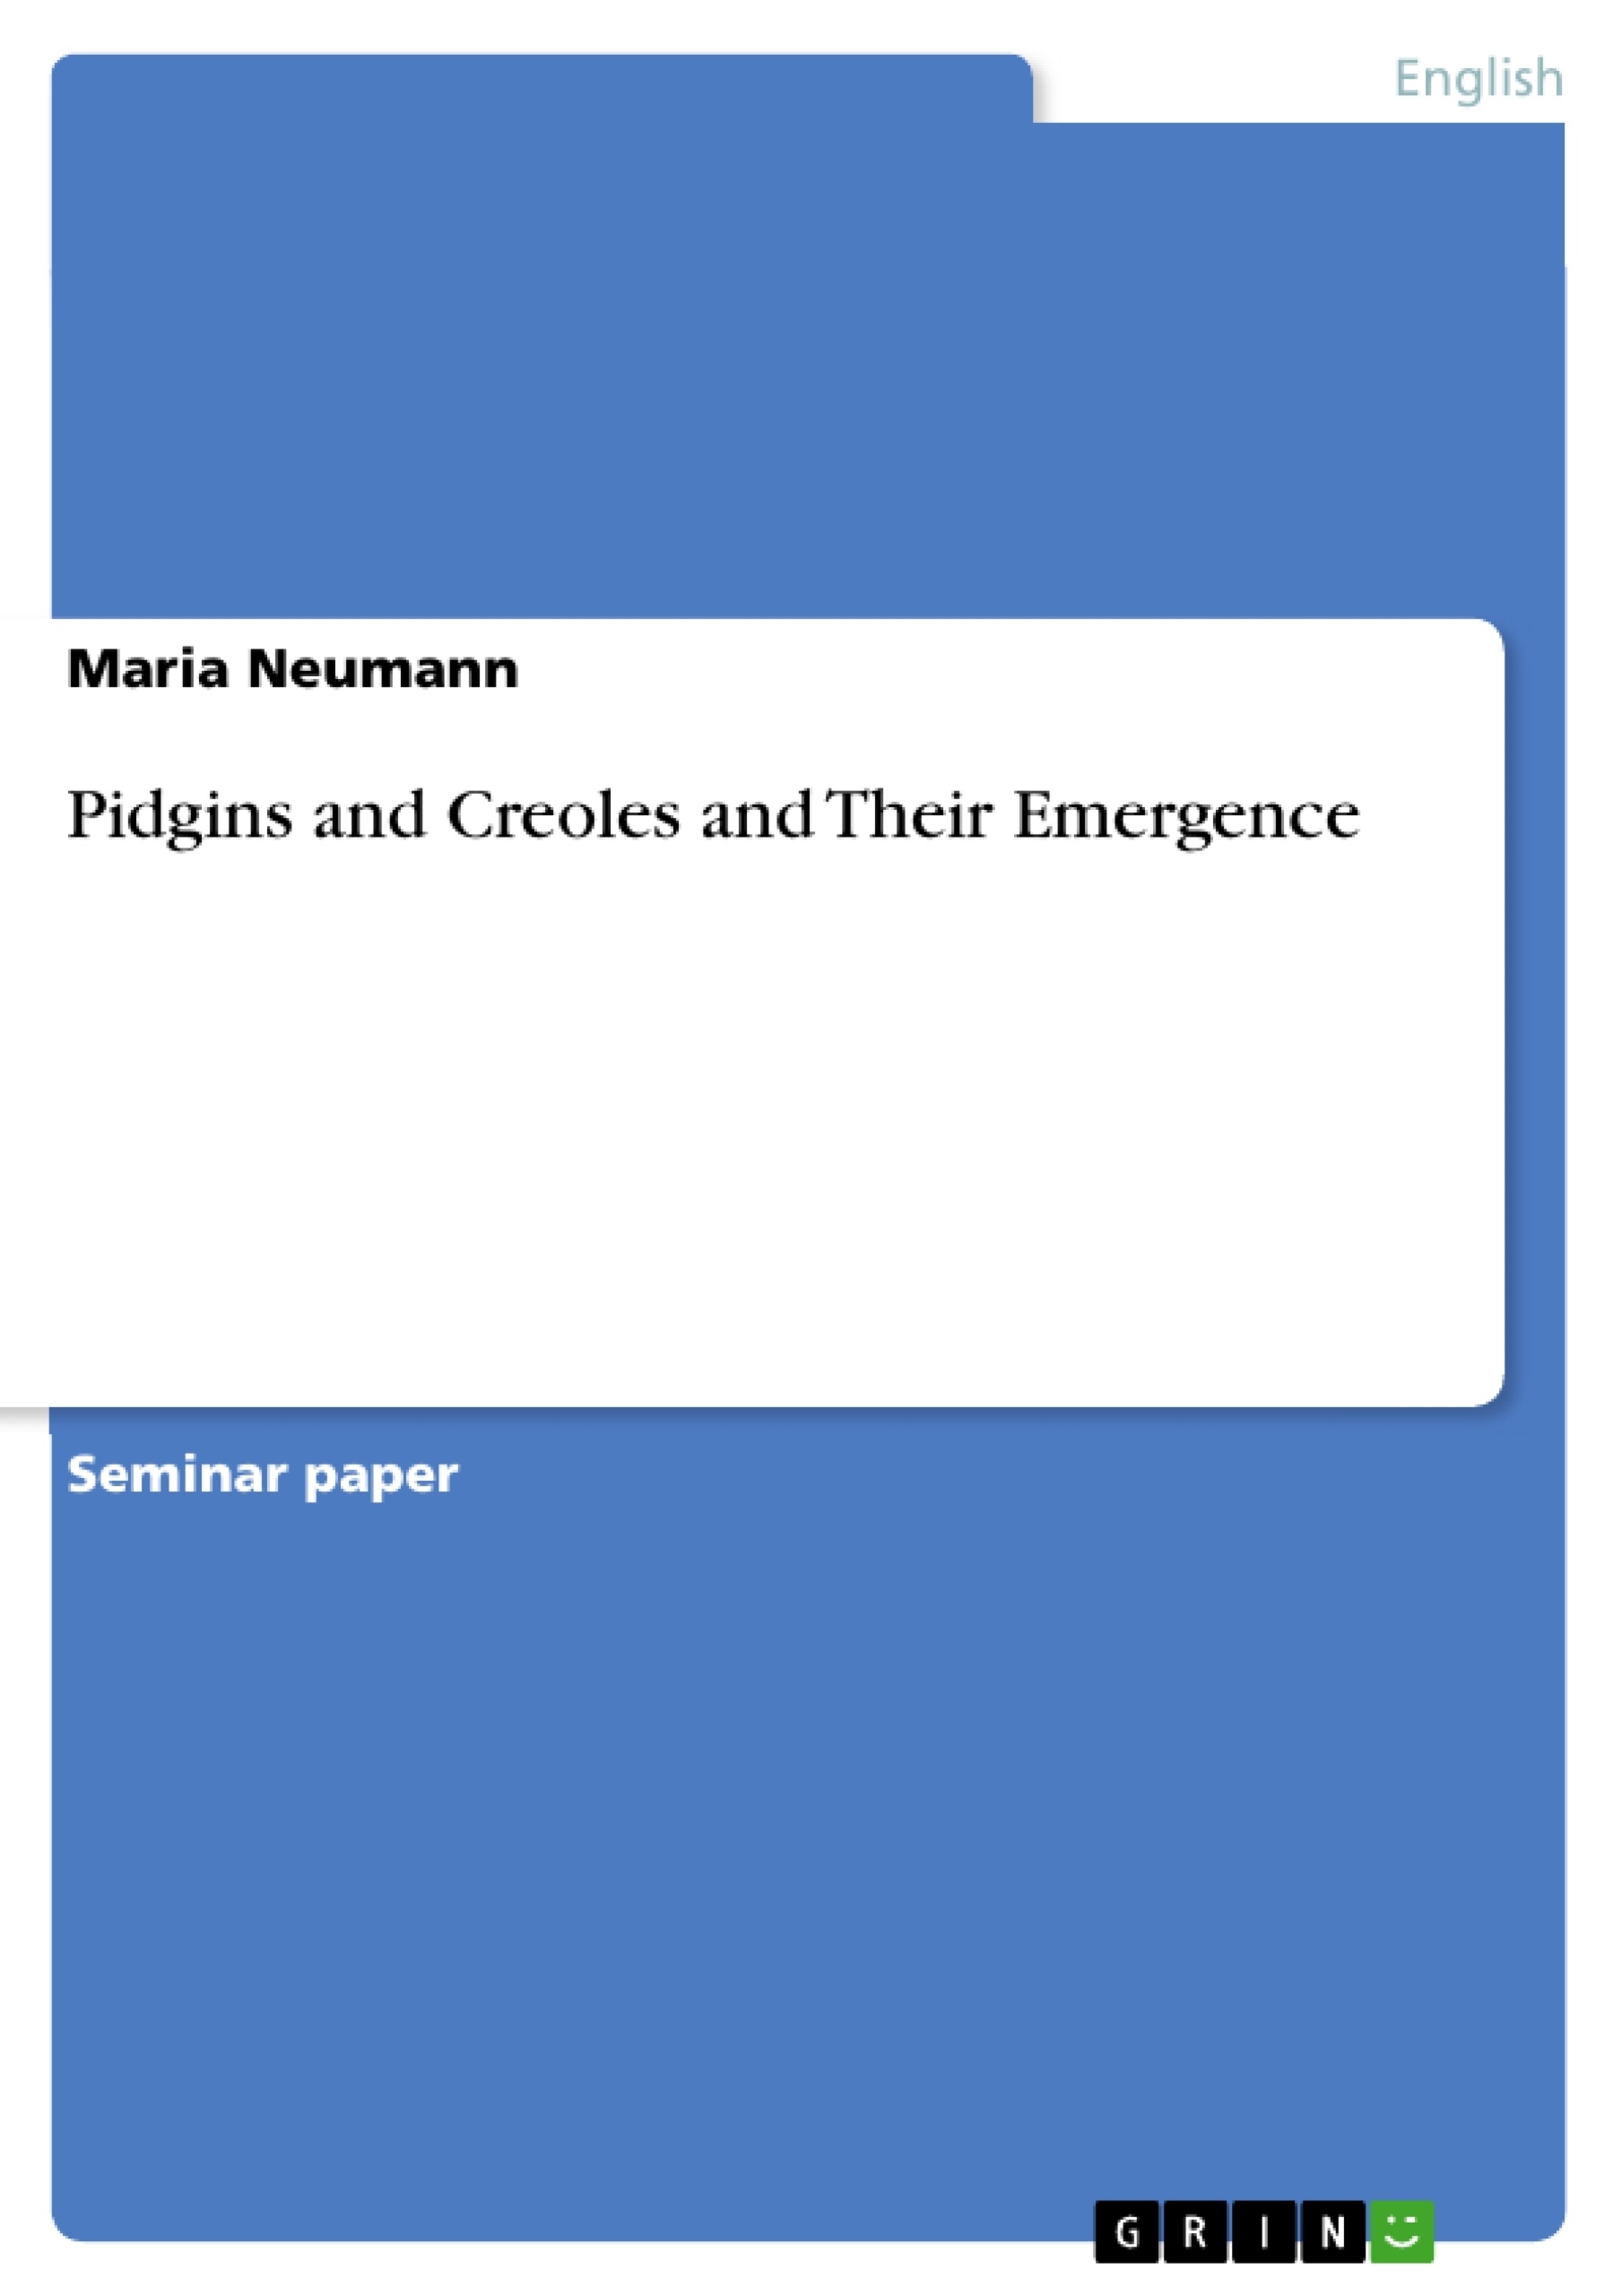 Title: Pidgins and Creoles and Their Emergence